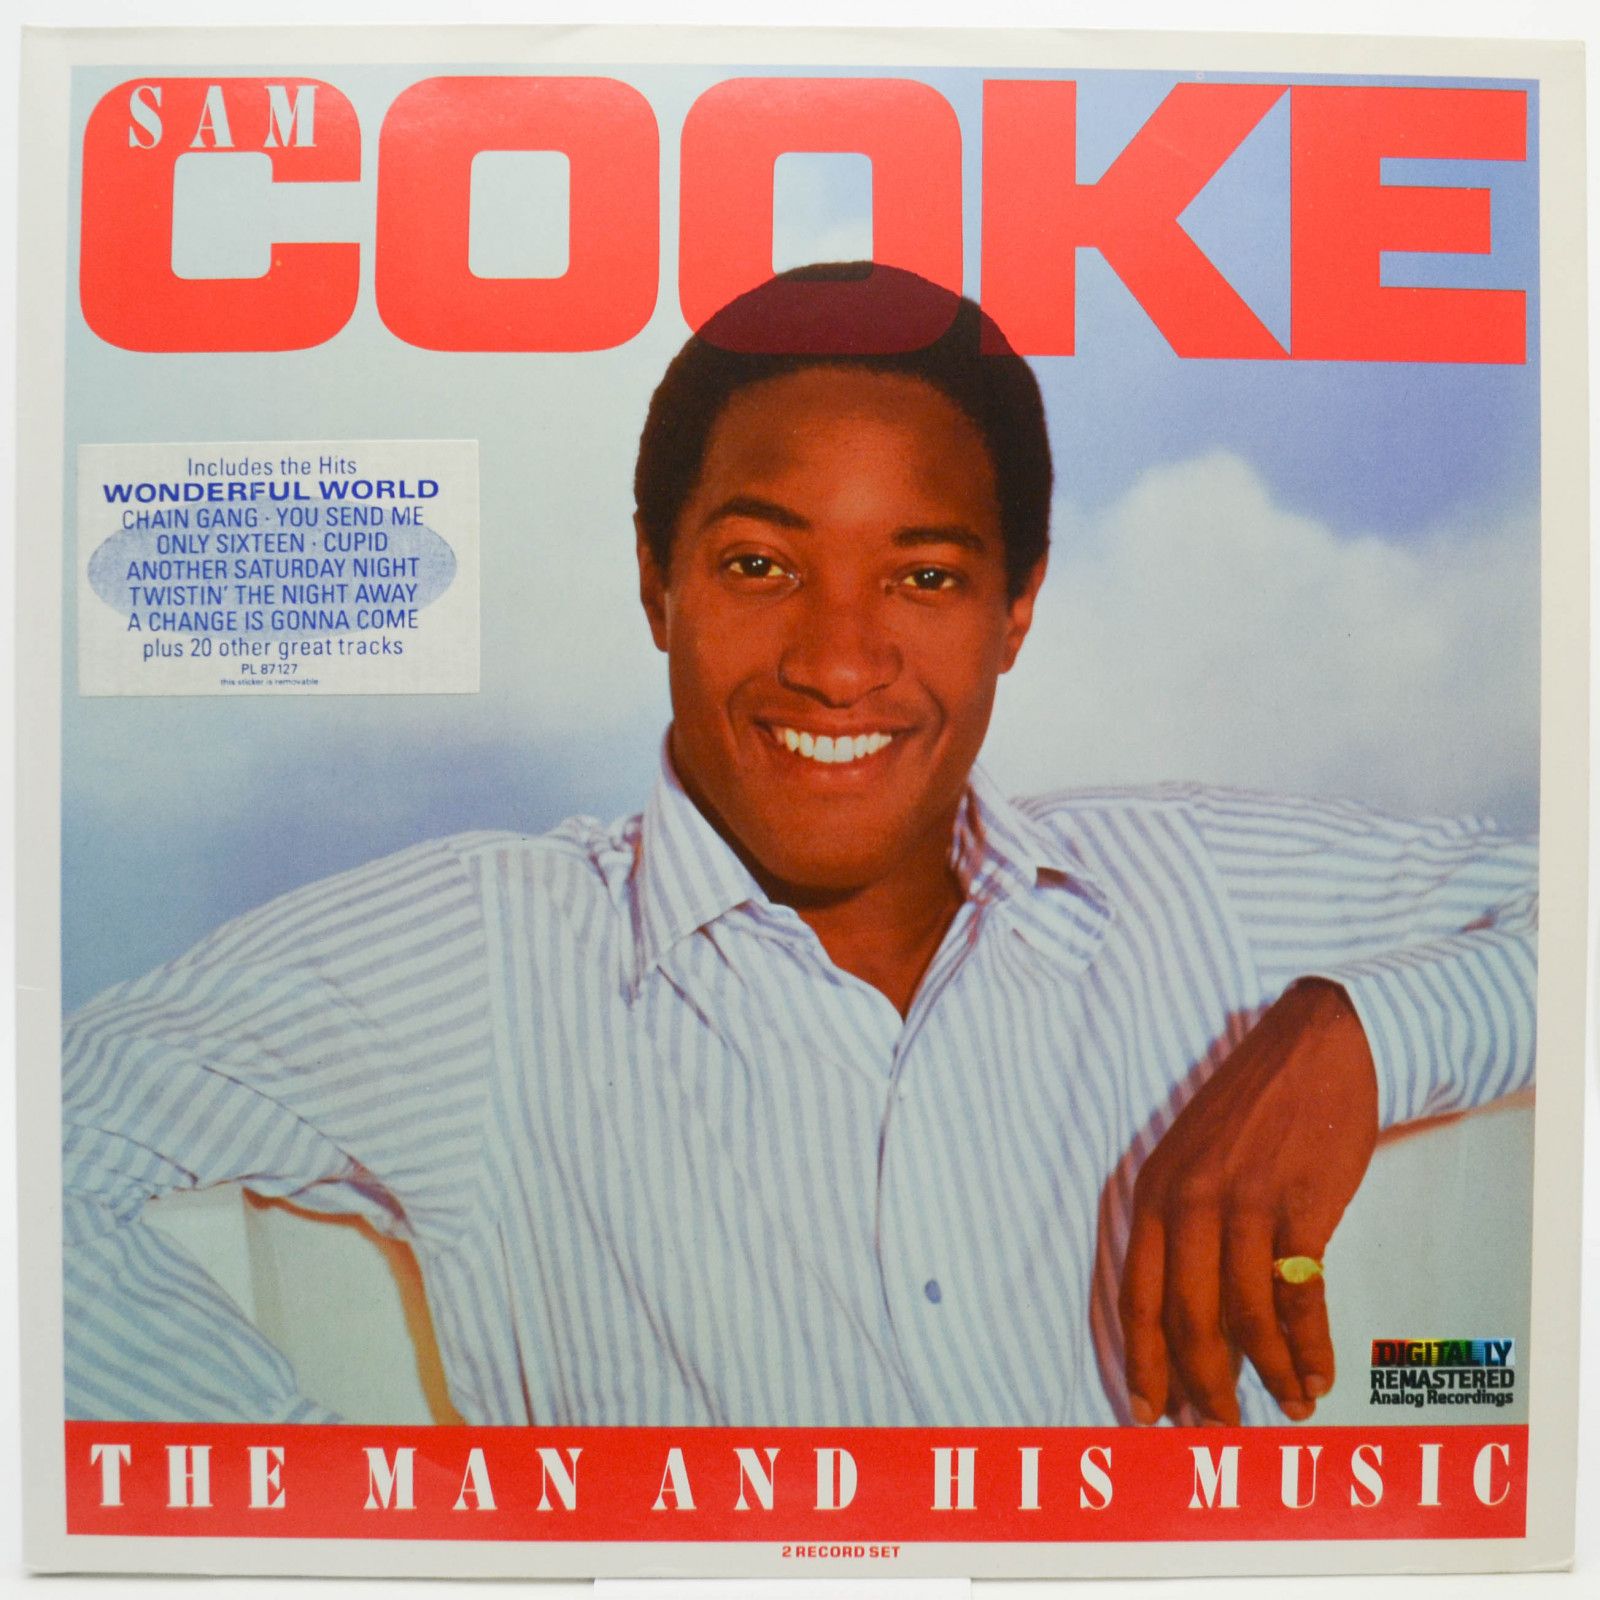 Sam Cooke — The Man And His Music (2LP), 1986